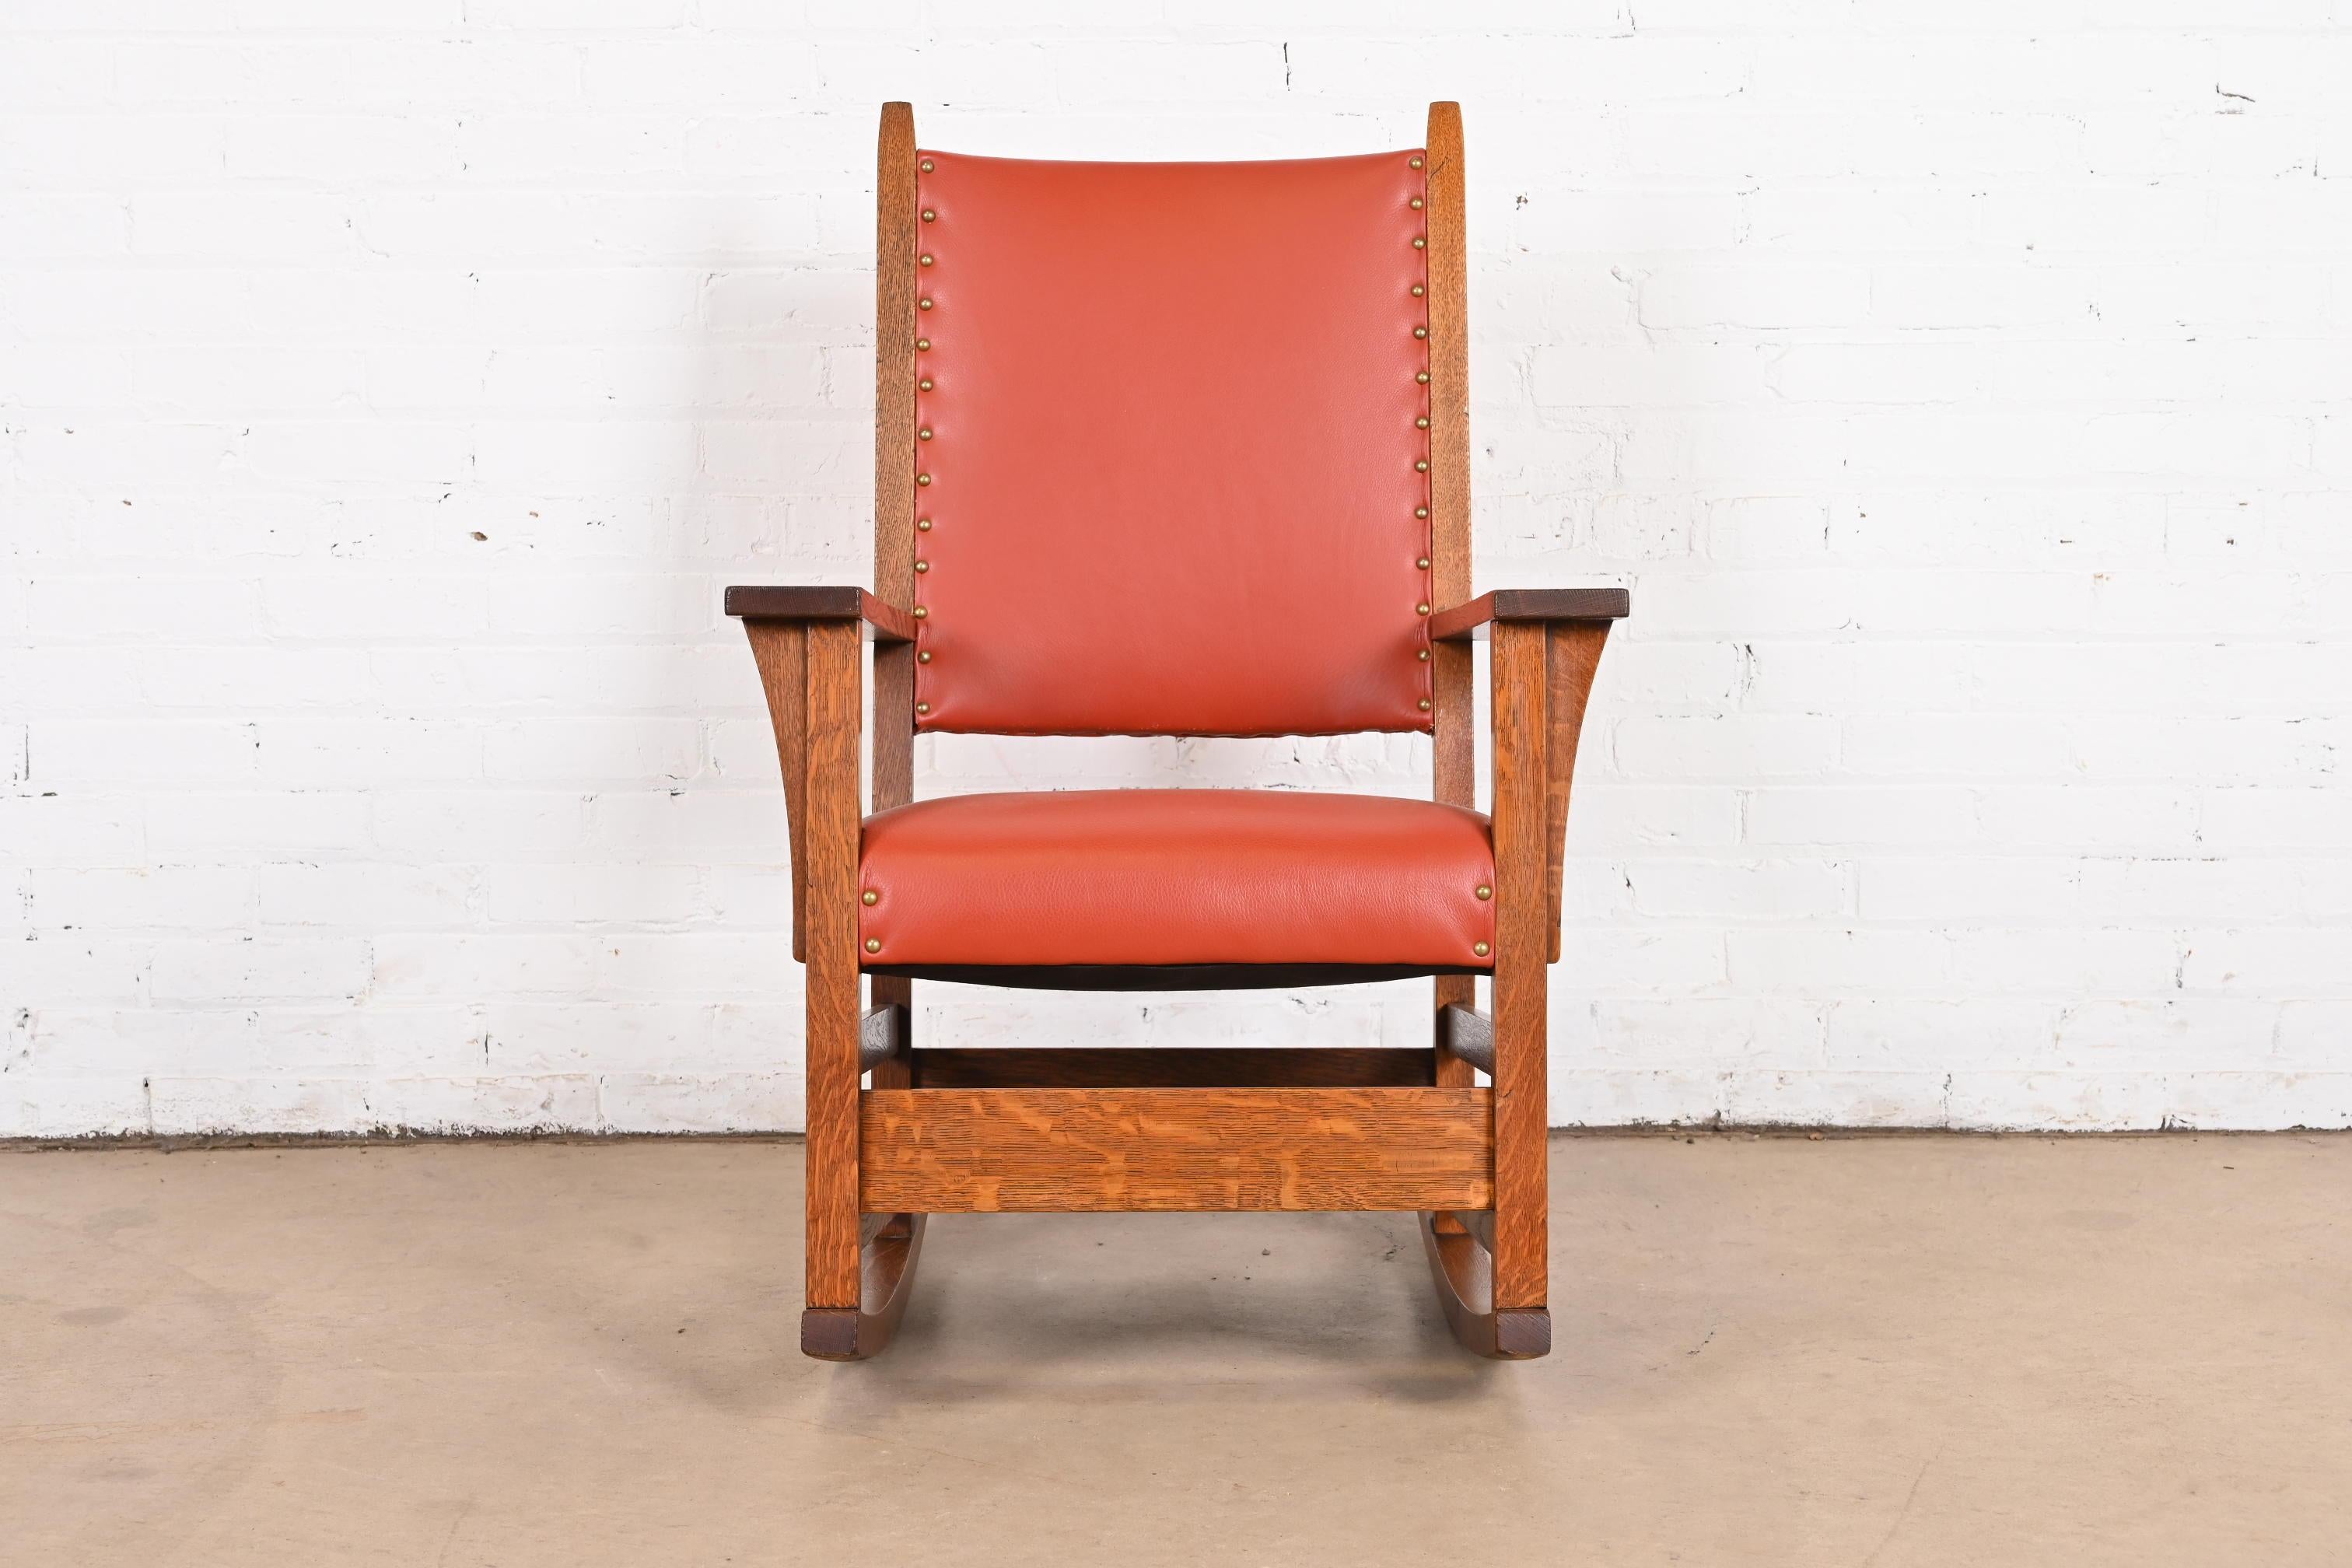 A gorgeous Mission oak Arts & Crafts rocking chair

By Gustav Stickley

USA, Circa 1900

Solid quarter sawn oak, with brass studded leather seat and back.

Measures: 25.5